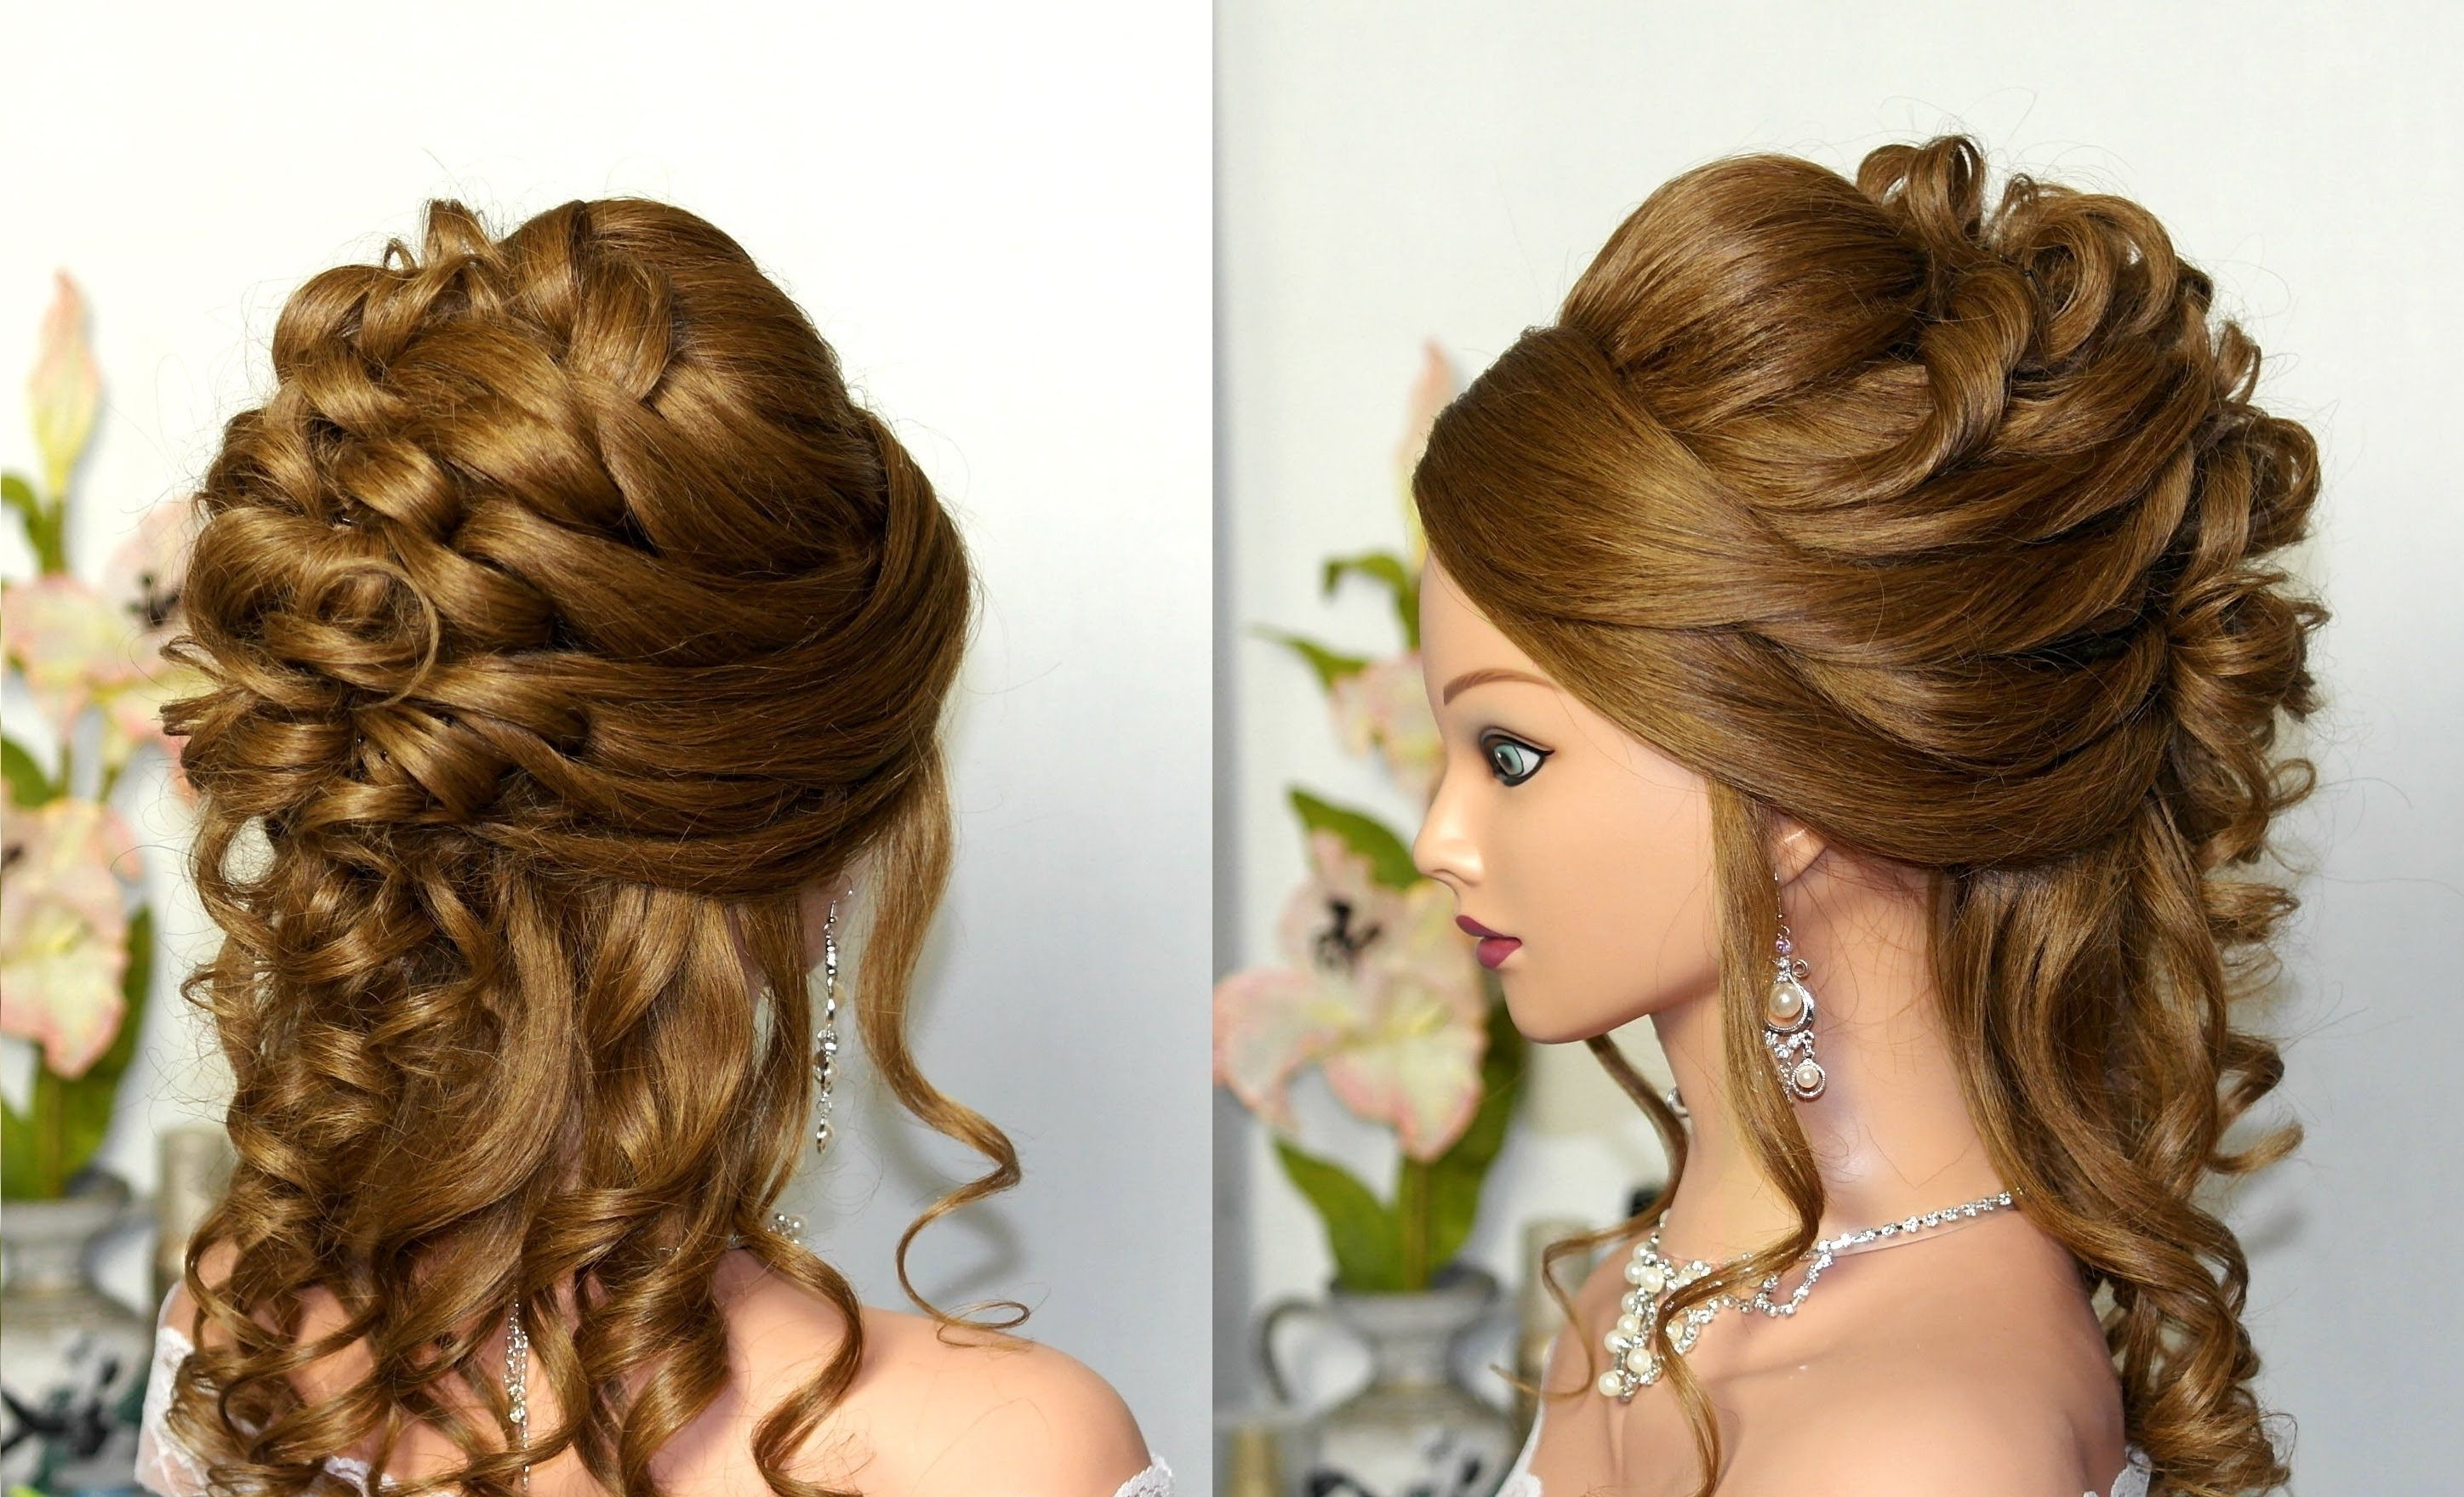 How To Choose The Best Kind Of Prom Hairstyles For Long Hair Pertaining To 2018 Wedding Hairstyles For Extremely Long Hair (View 1 of 15)